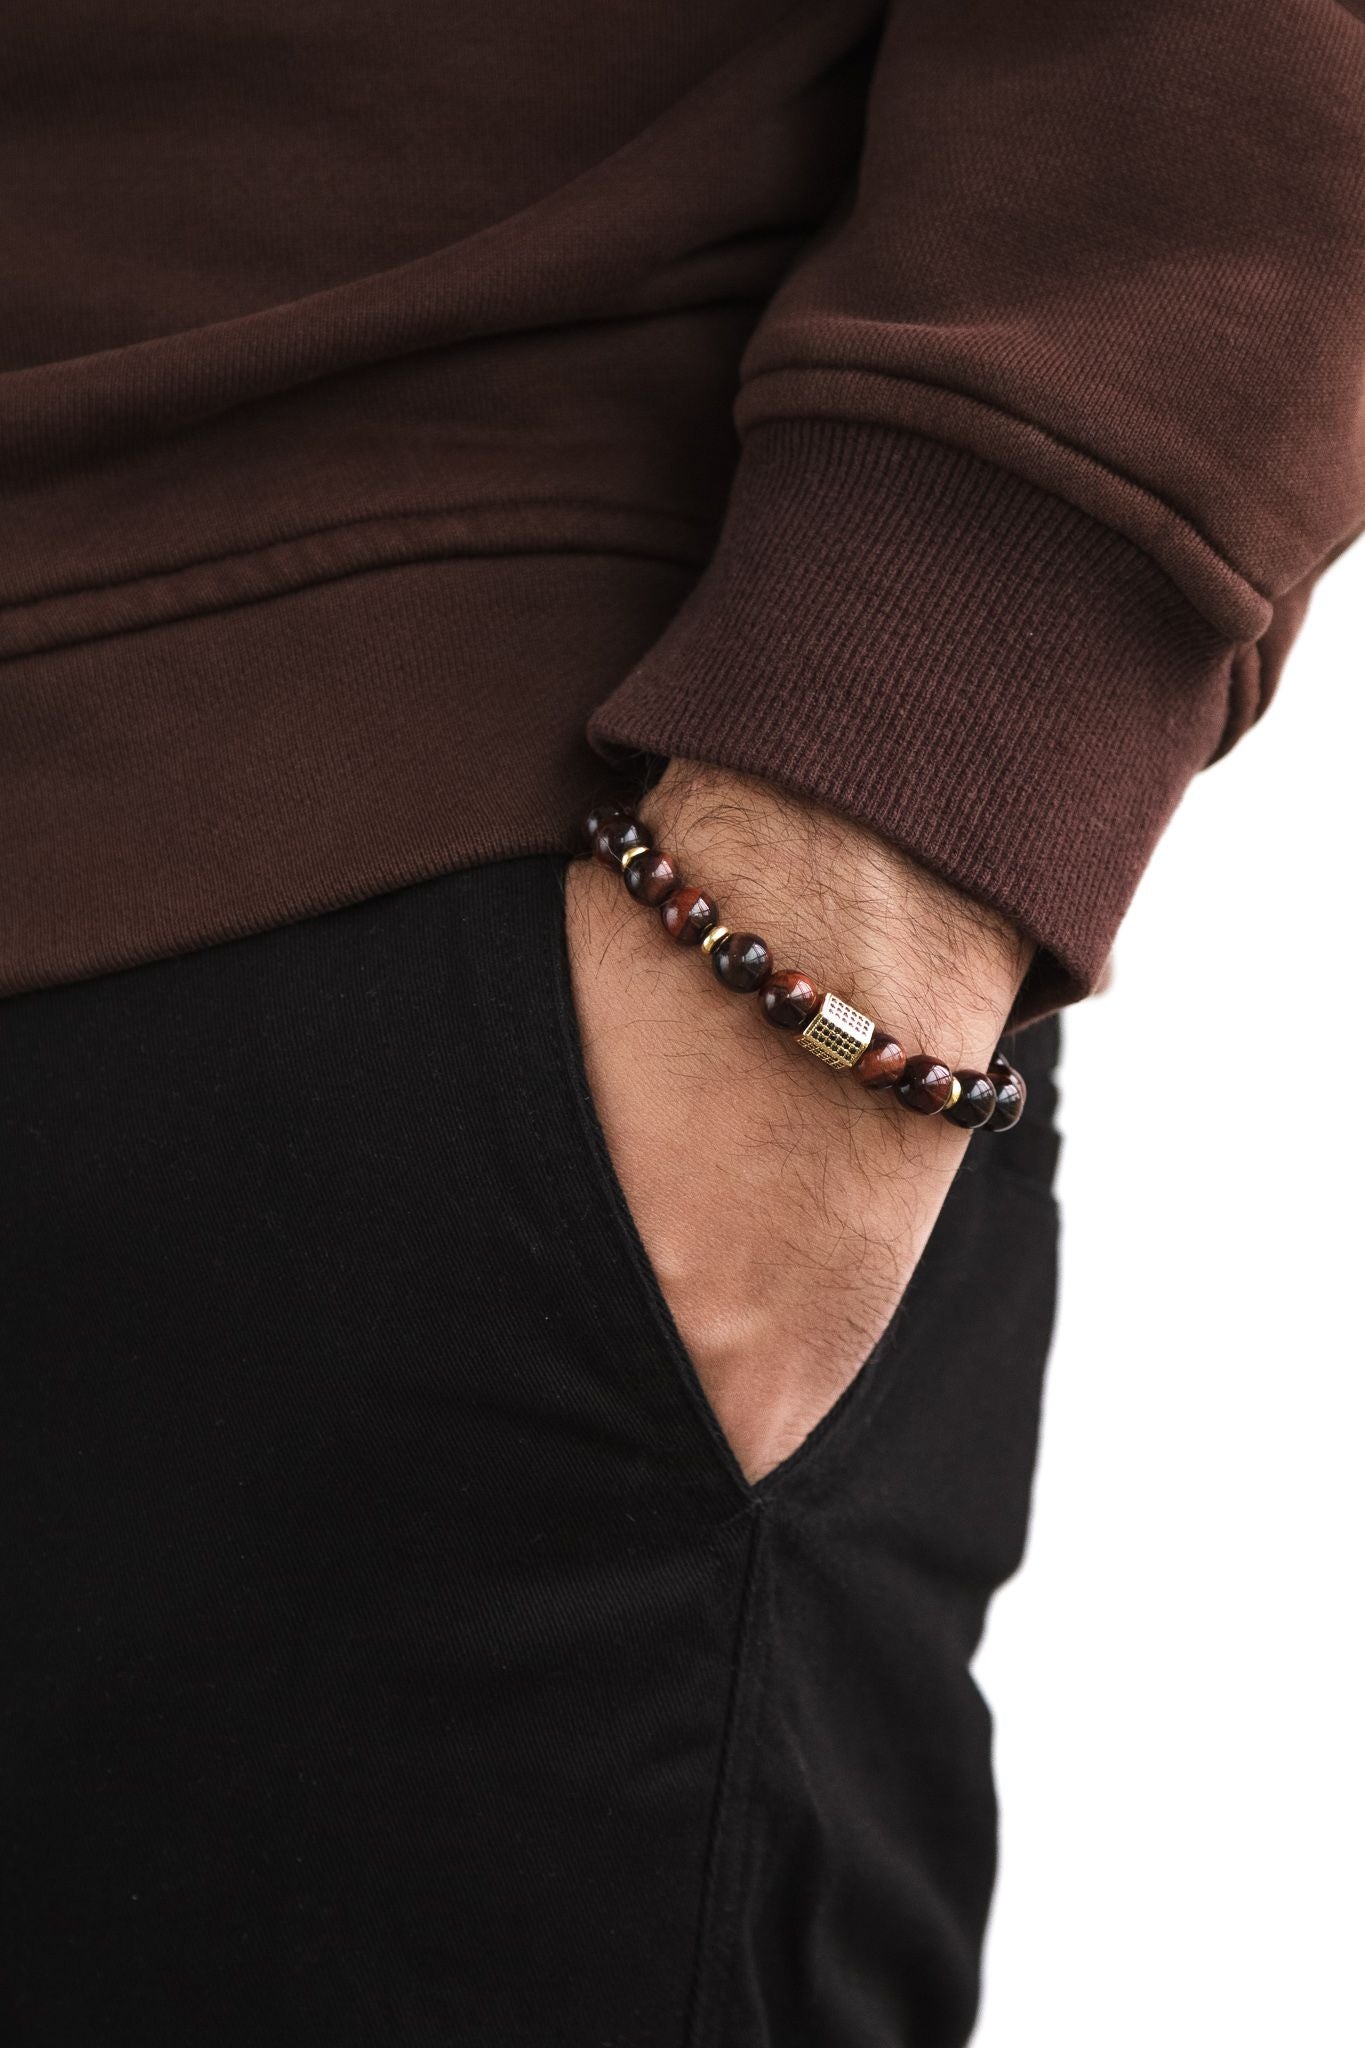 UNCOMMON Men's Beads Bracelet One Gold Jeweled Chest Charm Tiger-eye Beads